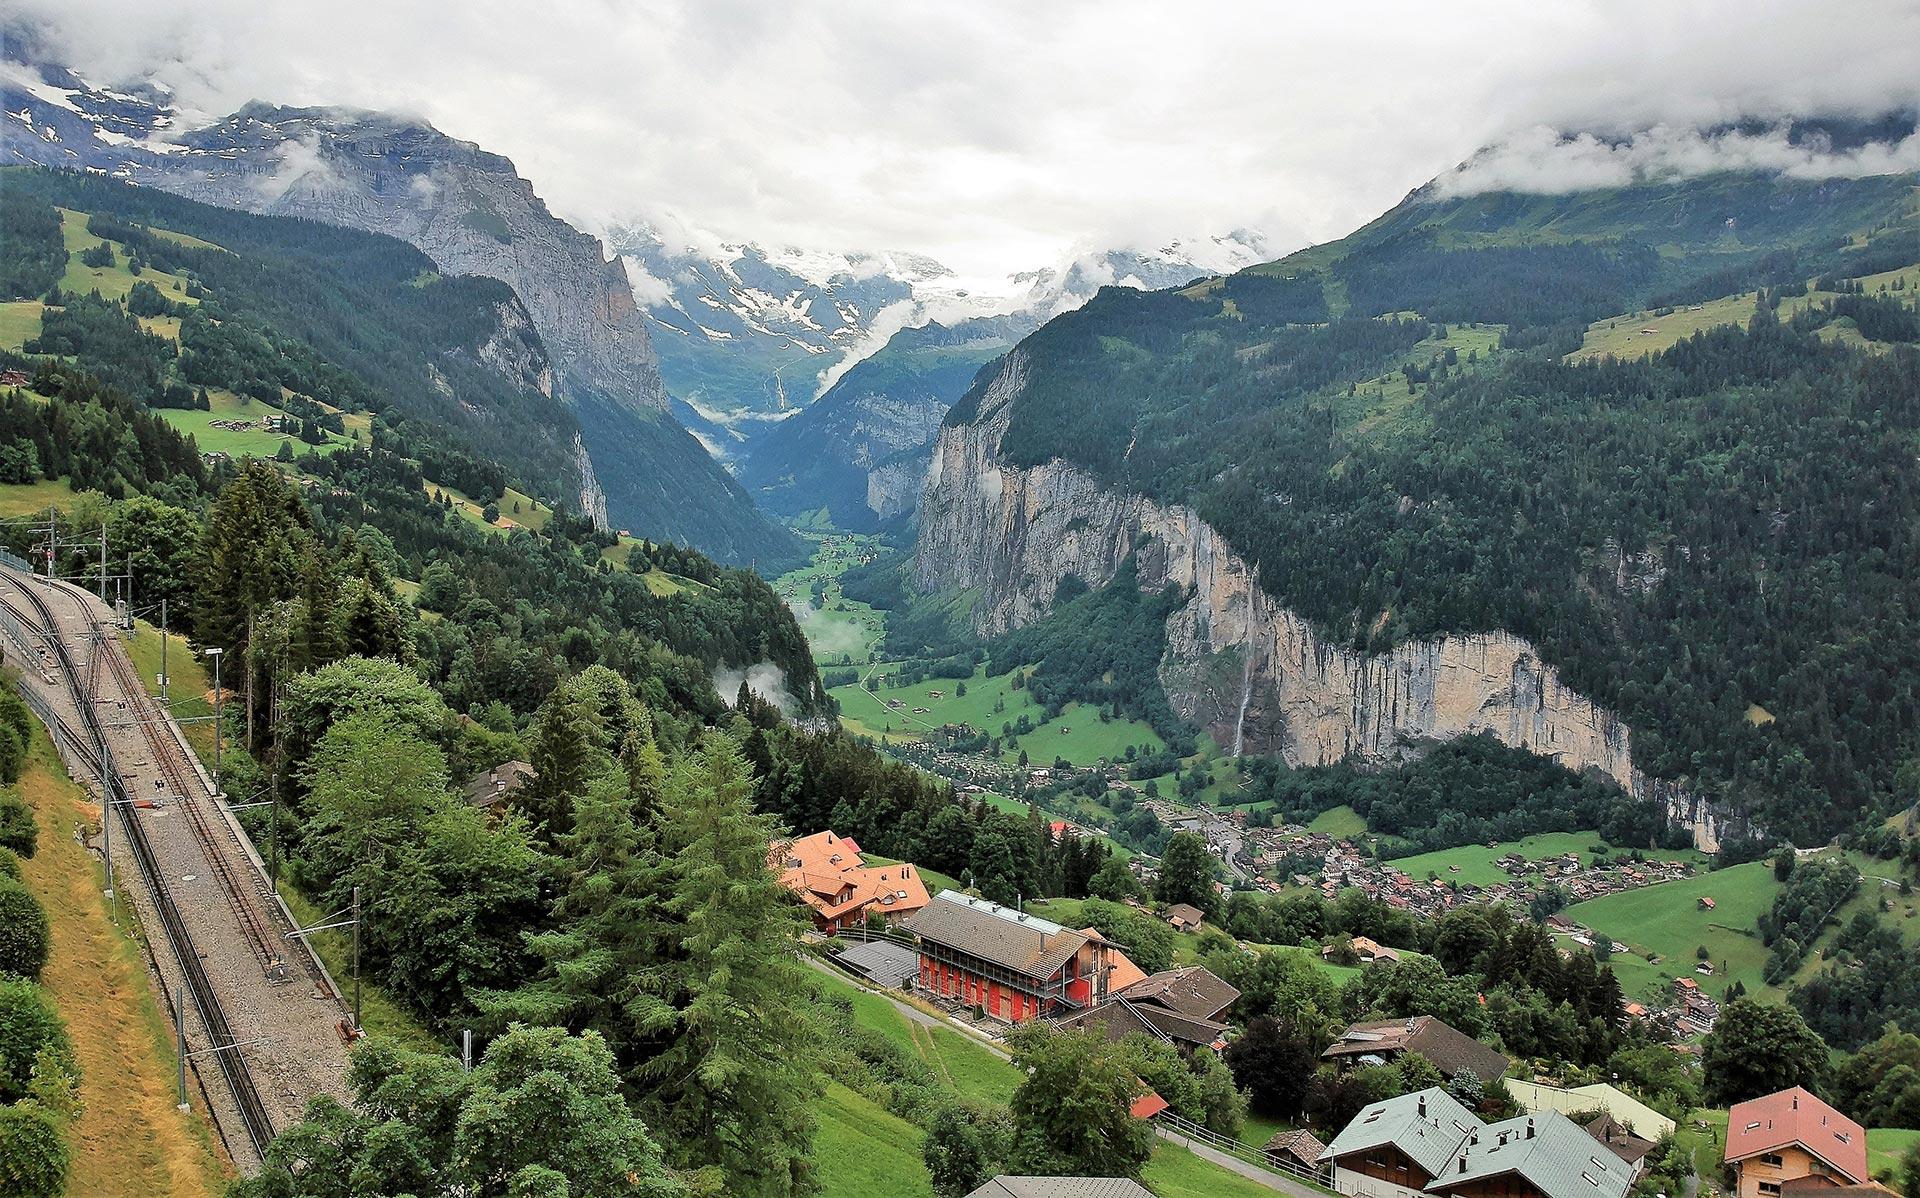 City of Gimmelwald